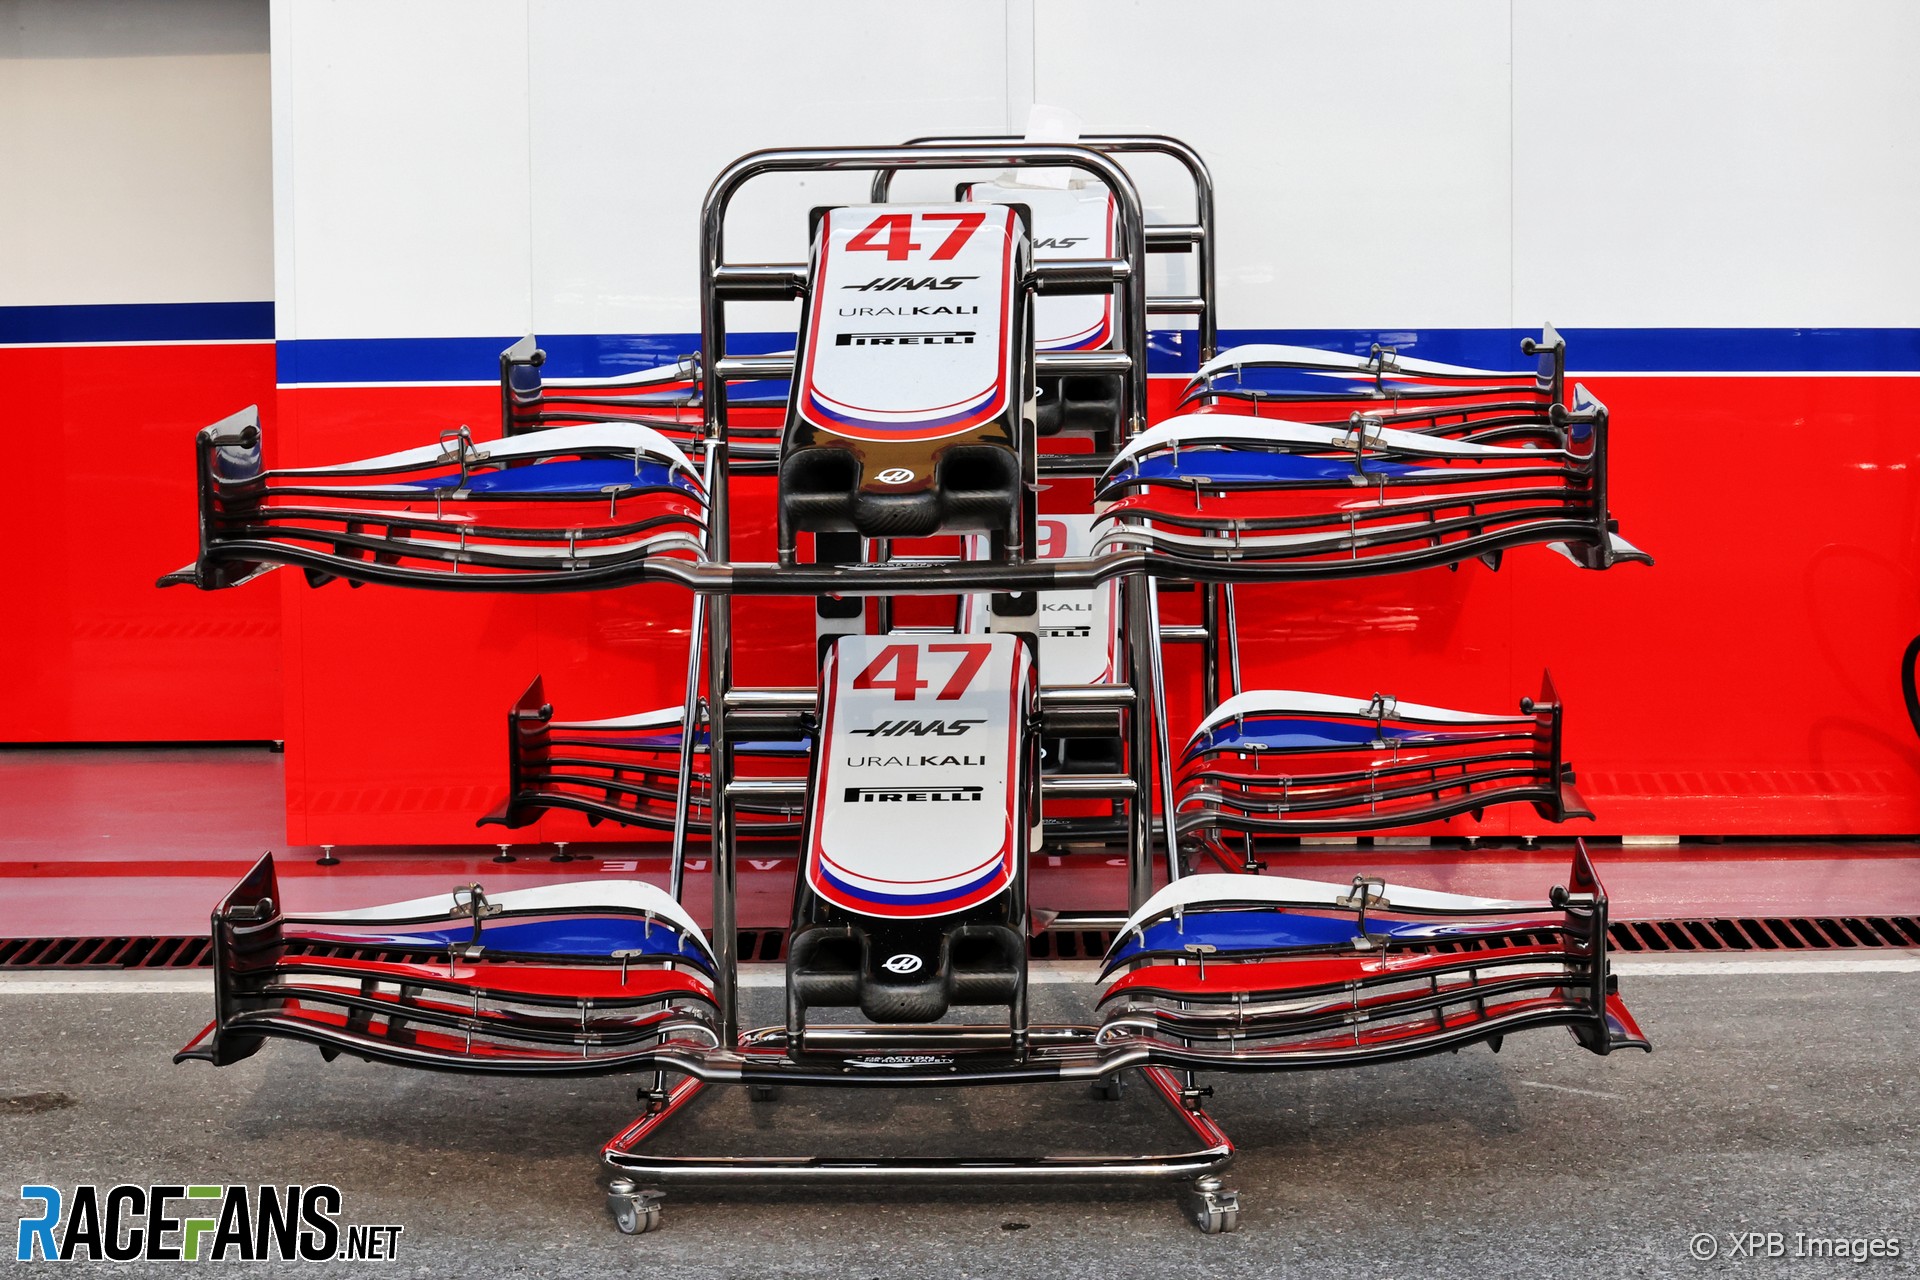 Haas front wing, Losail International Circuit, 2021